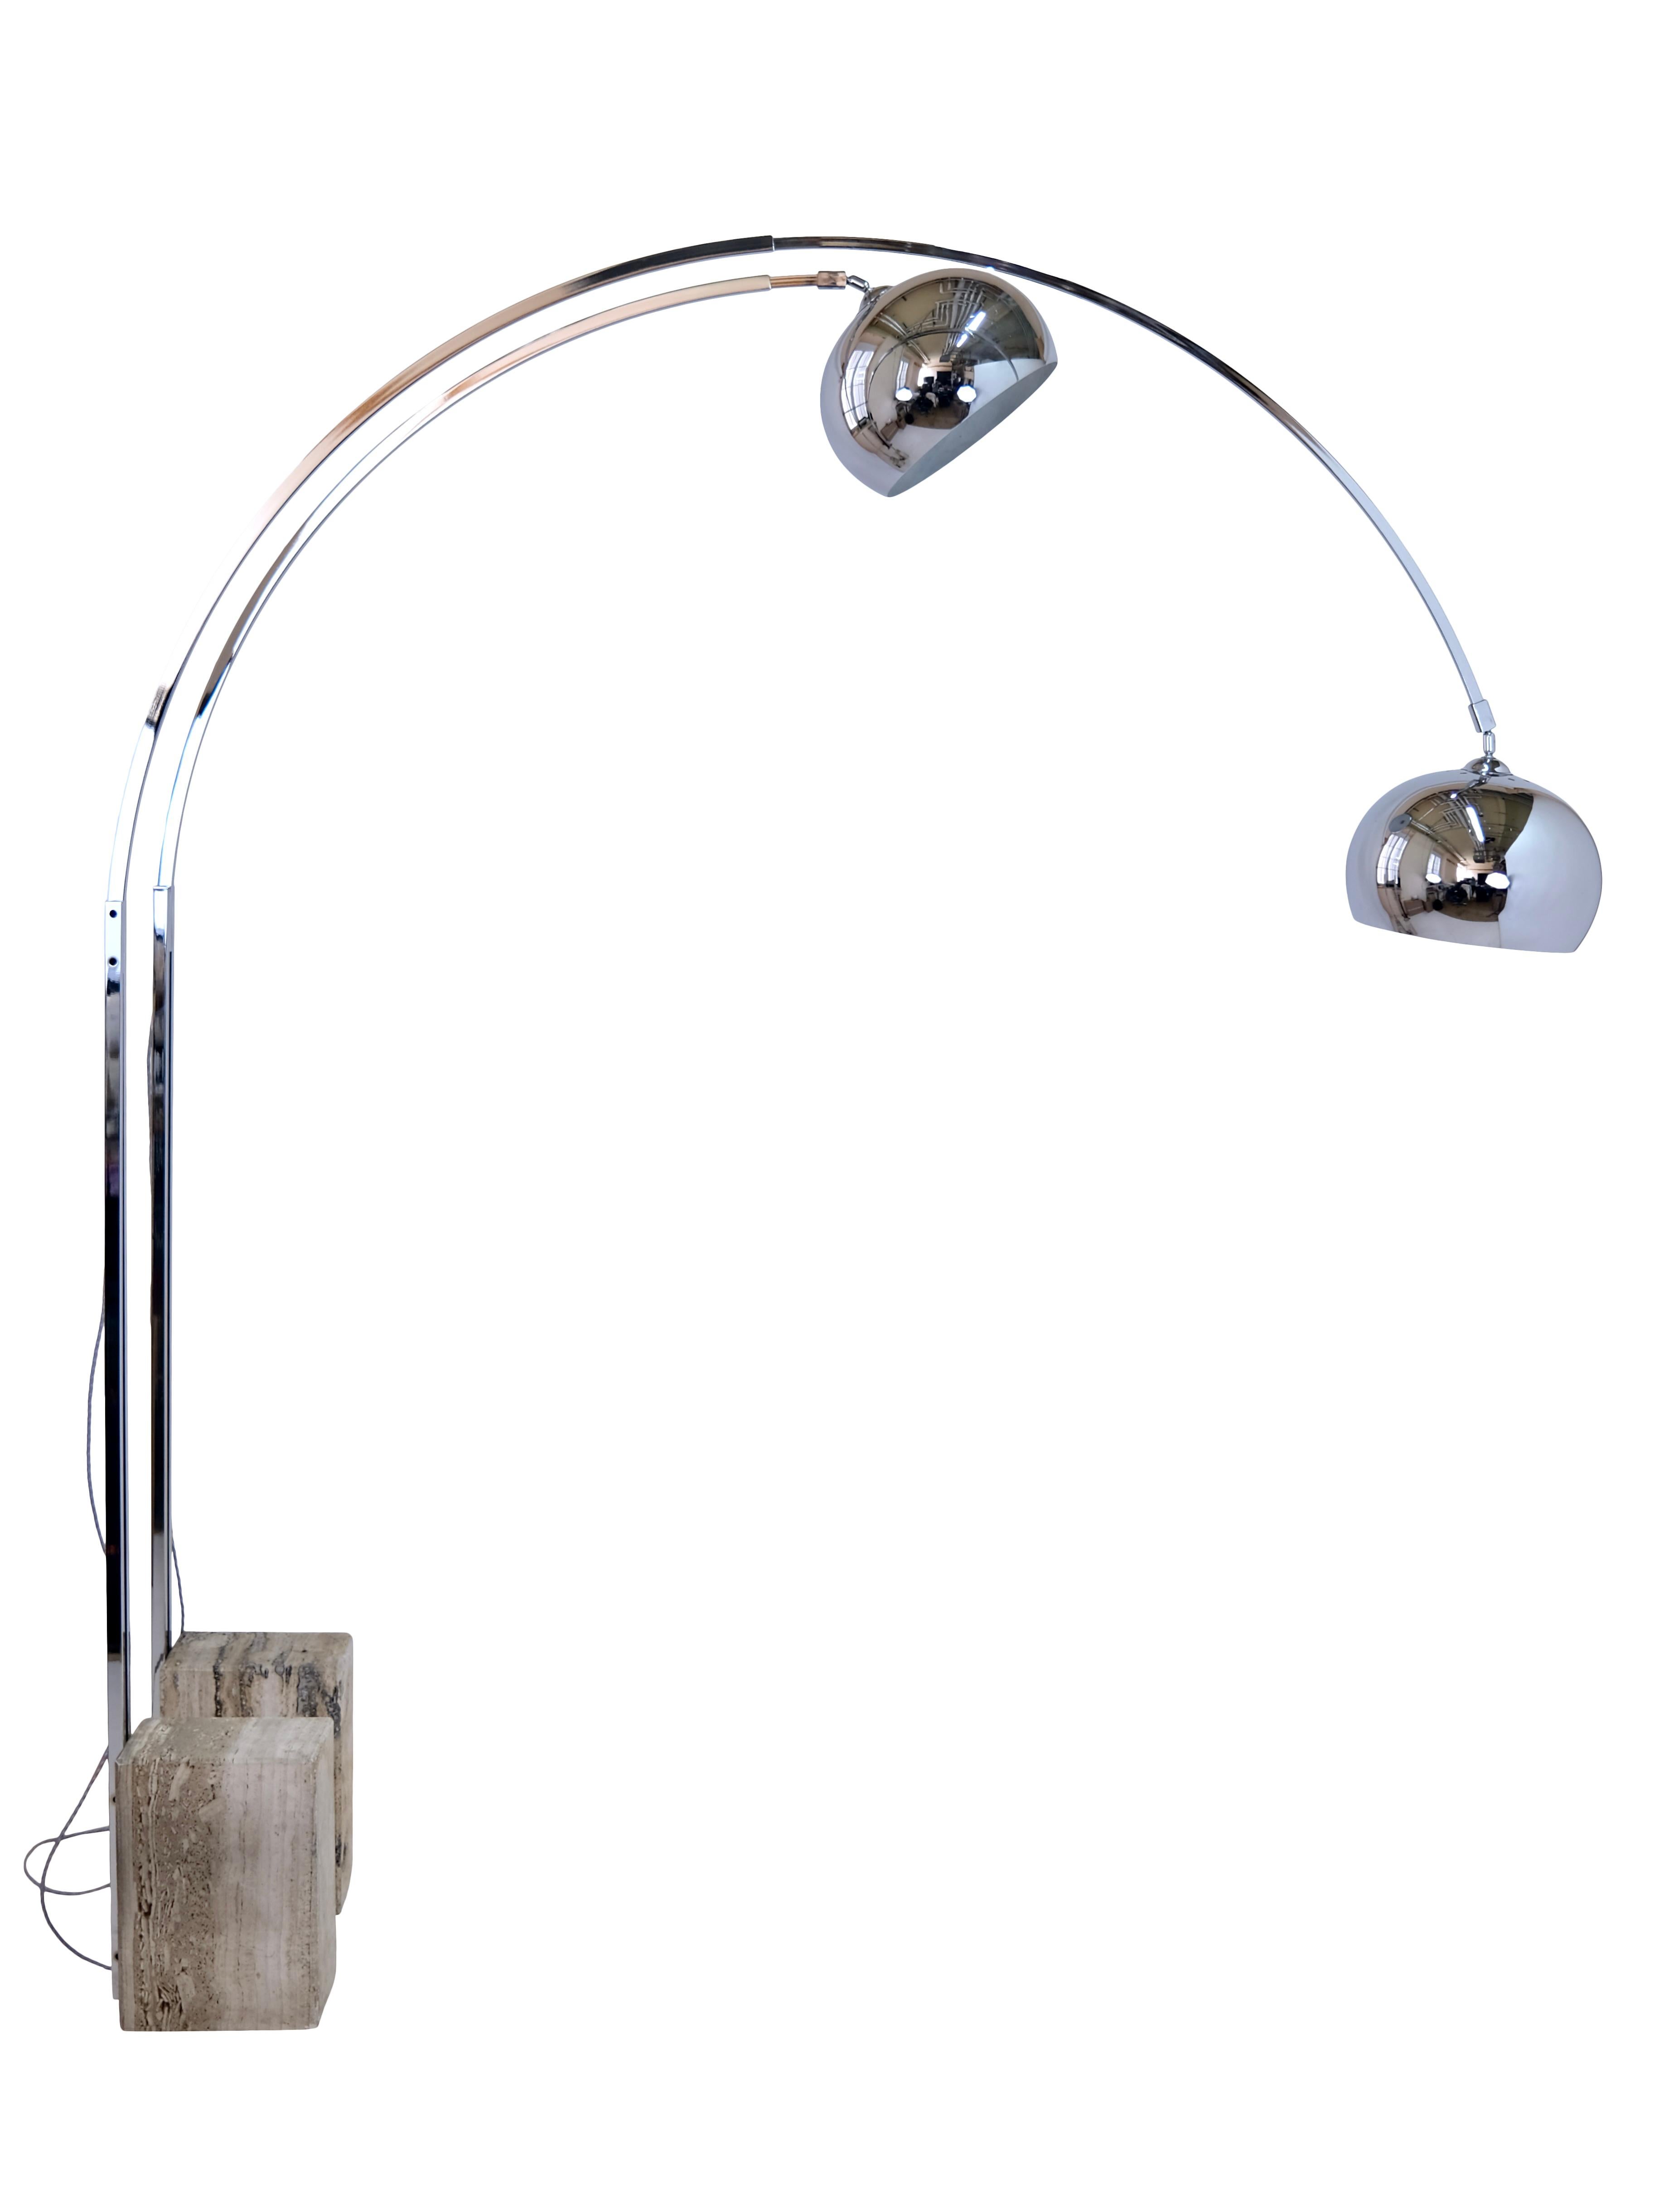 Floor Lamp, Italian Design
Mid-Century, 1960/70s
Brass with original chrome, polished
Base made of beige marble
Dimensions:
Width: 120-180 cm
Hight: 220 cm
Diameter lampshade: 30 cm
Height to lower edge of lampshade: 130-190 cm